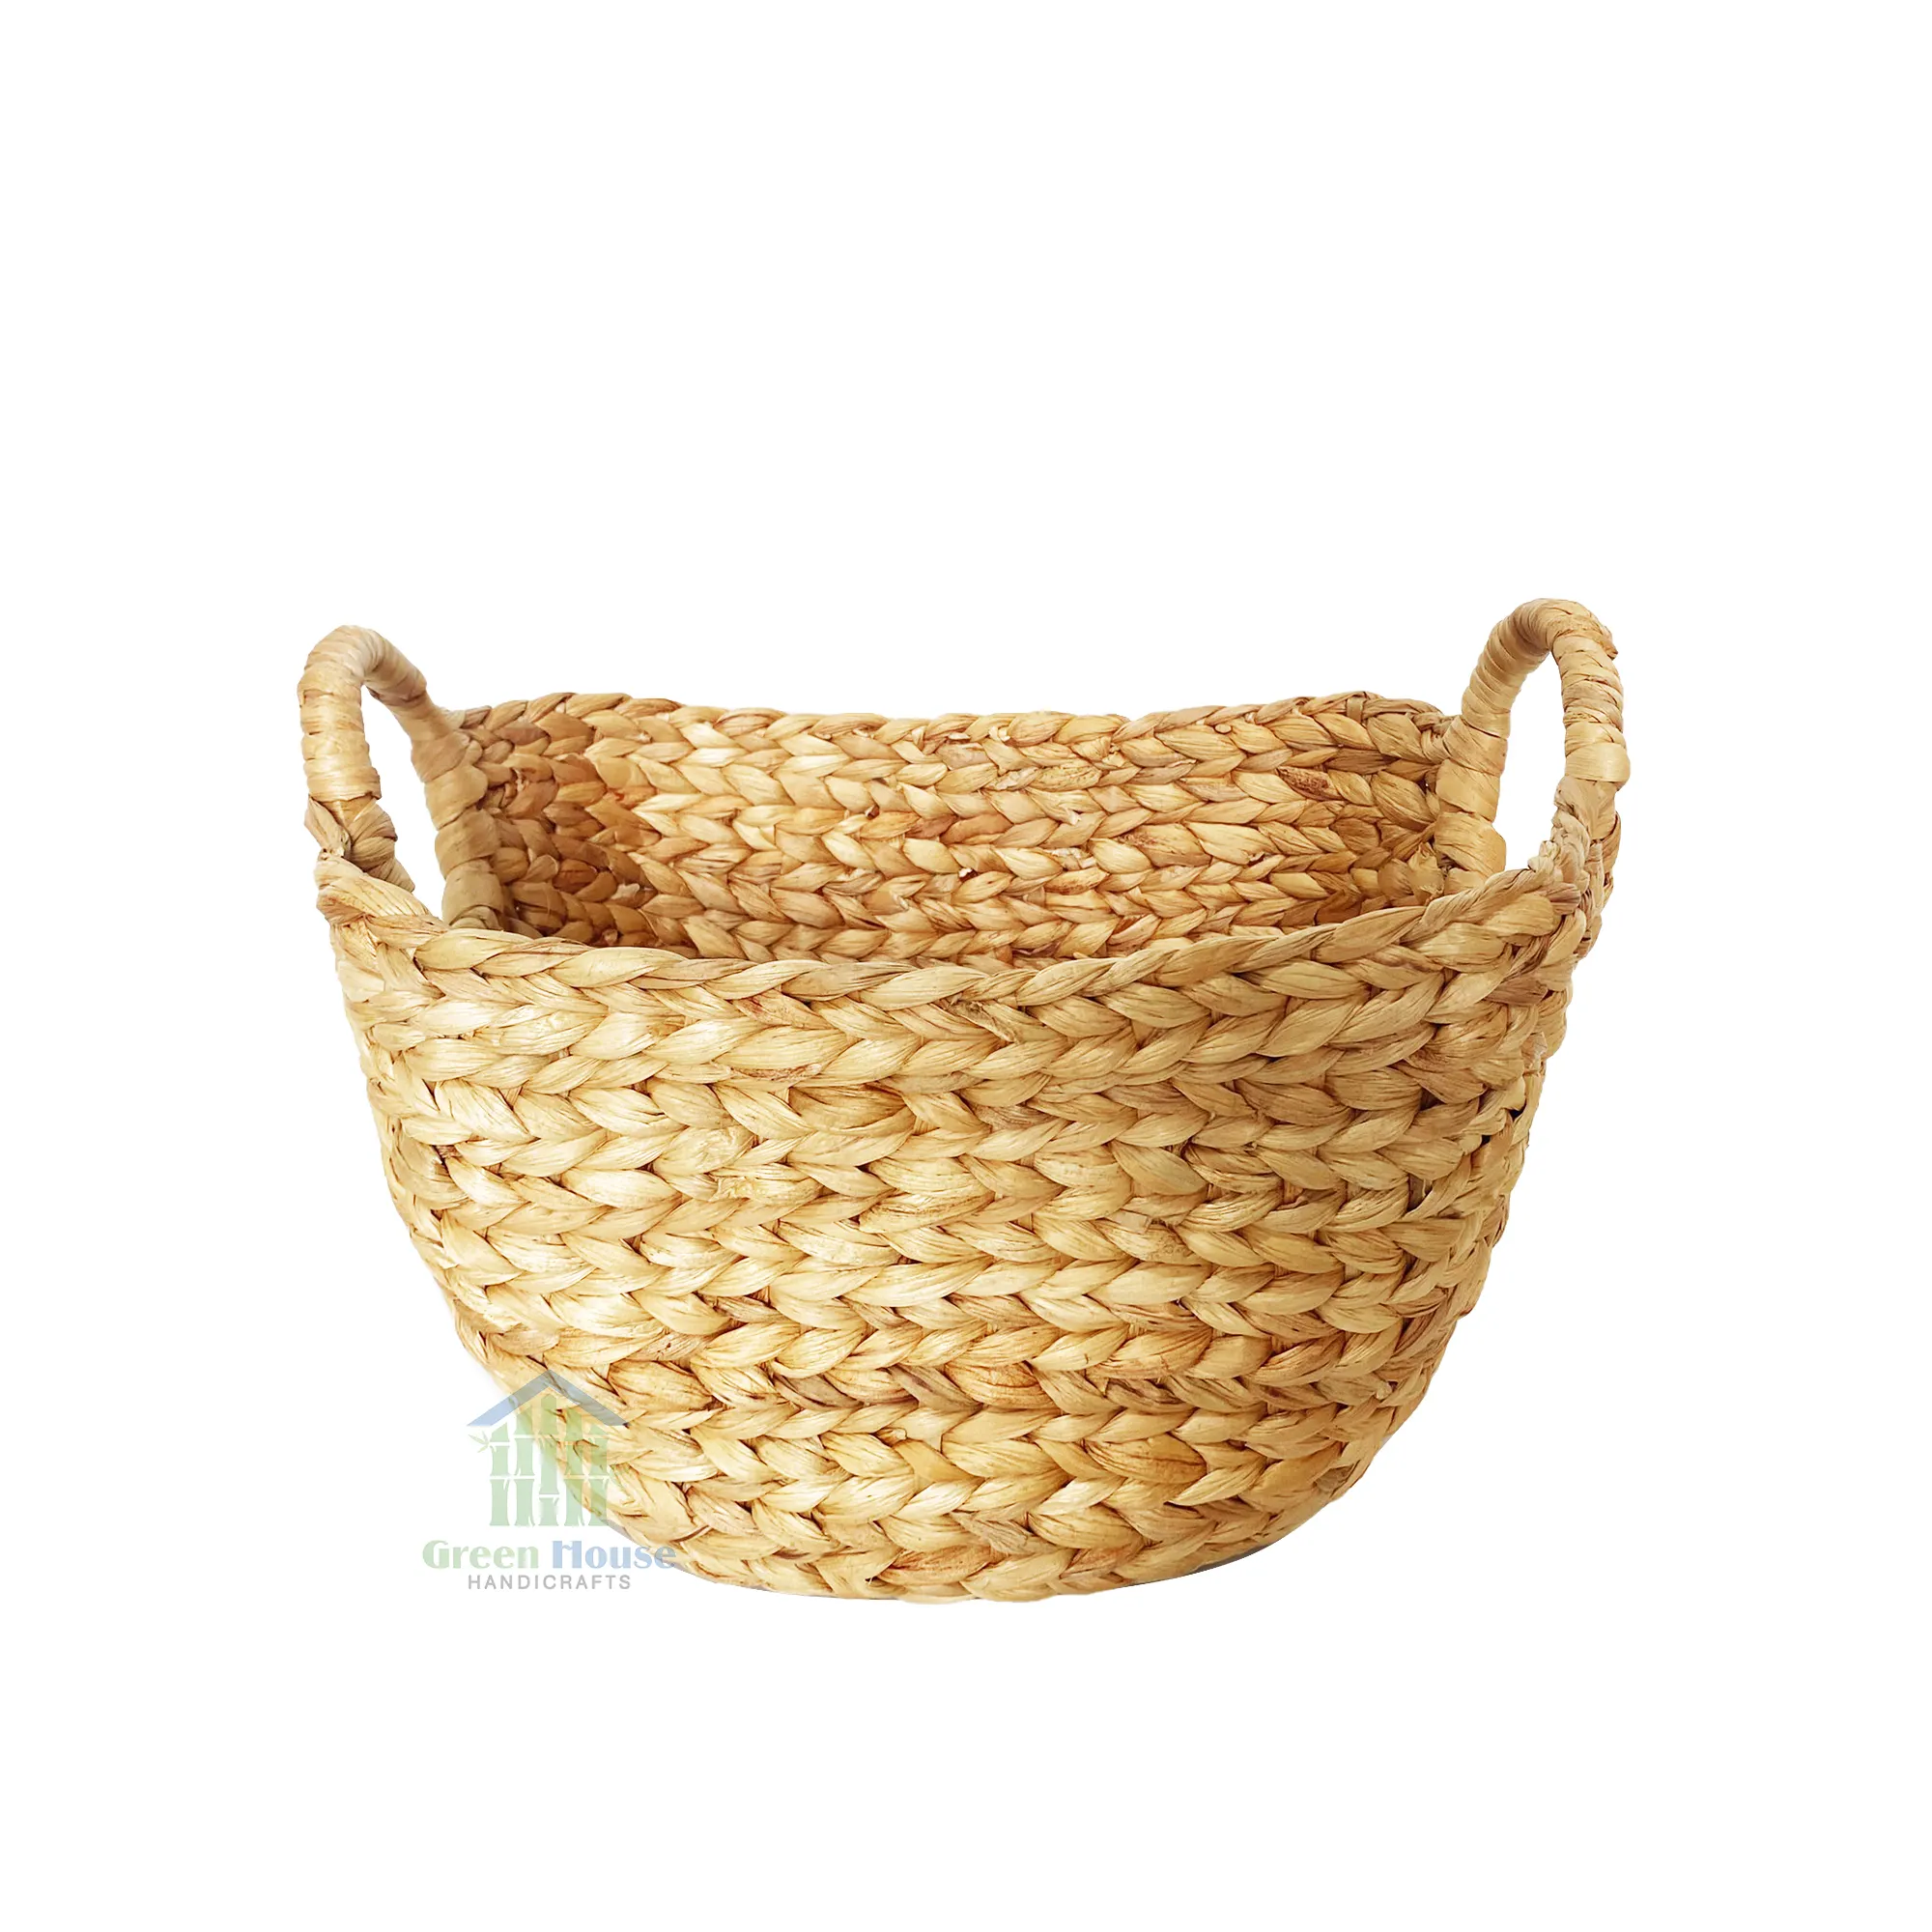 Home Storage and organization Water Hyacinth hot selling Basket Laundry Handwoven friendly wholesale From GreenHouse Handicraft